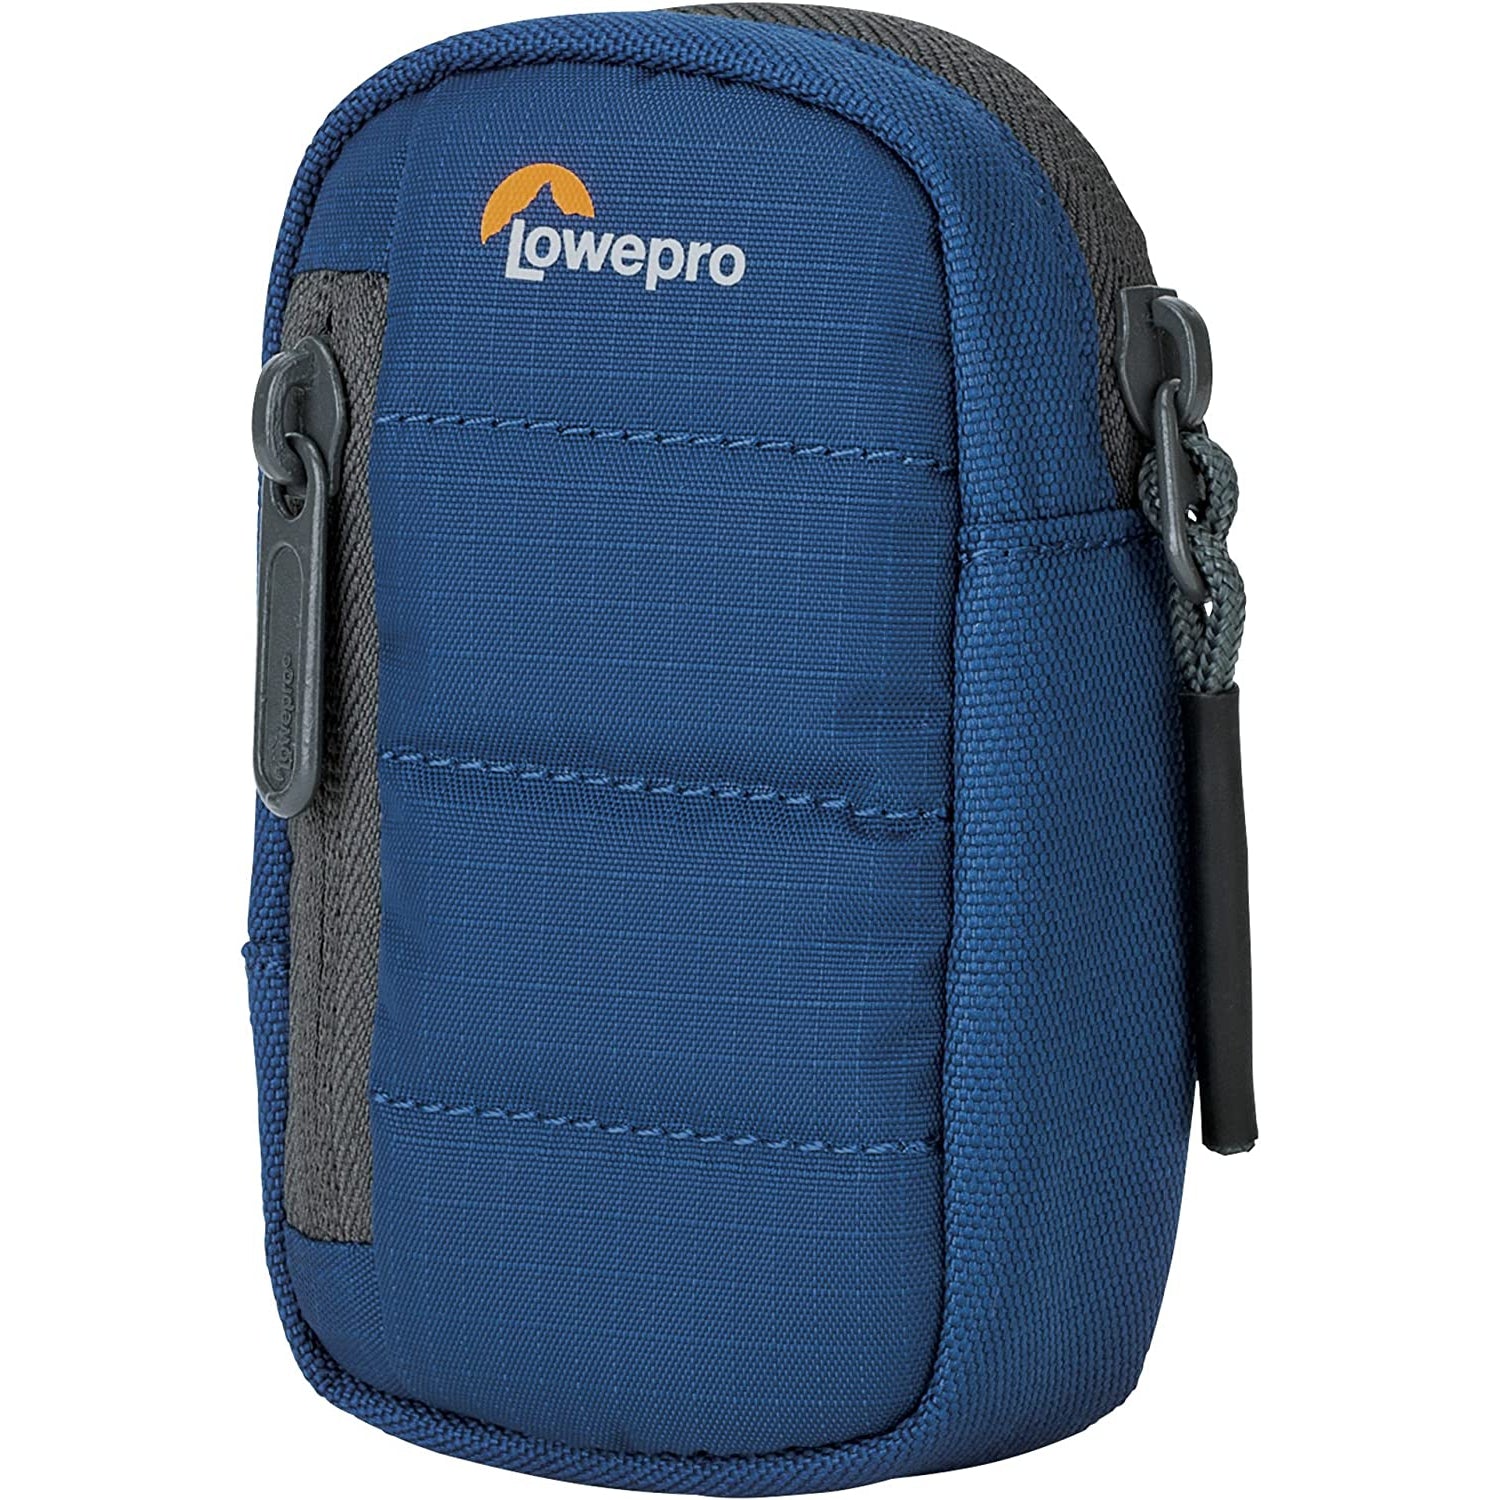 Lowepro Tahoe CS 10 Case for Ultra Compact Cameras - Blue